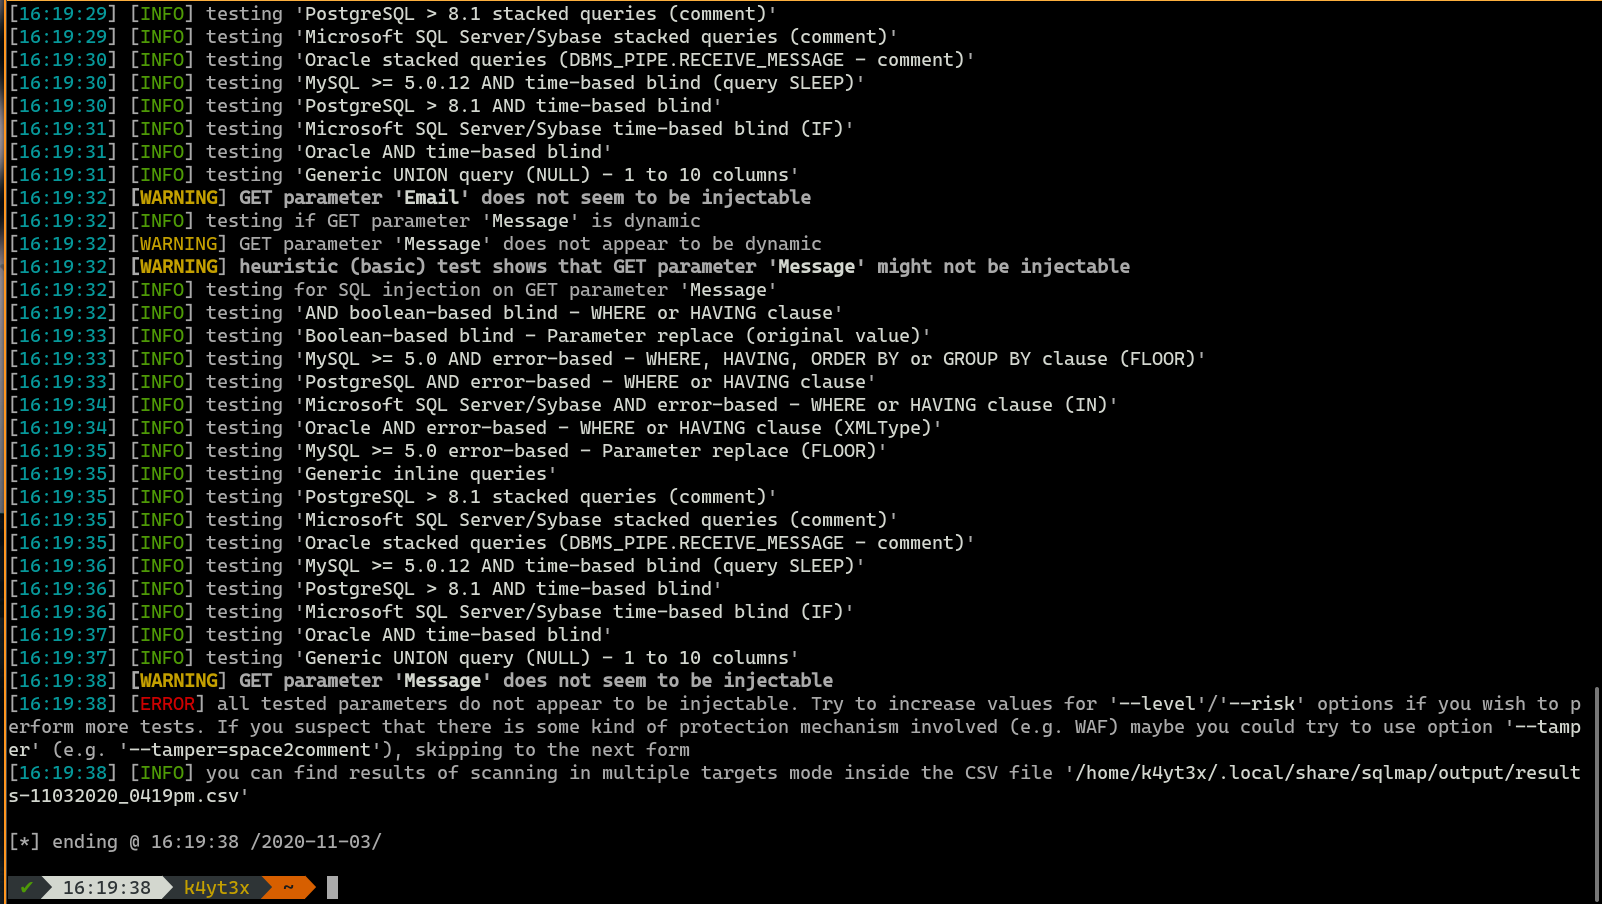 sqlmap is unable to find any working payloads